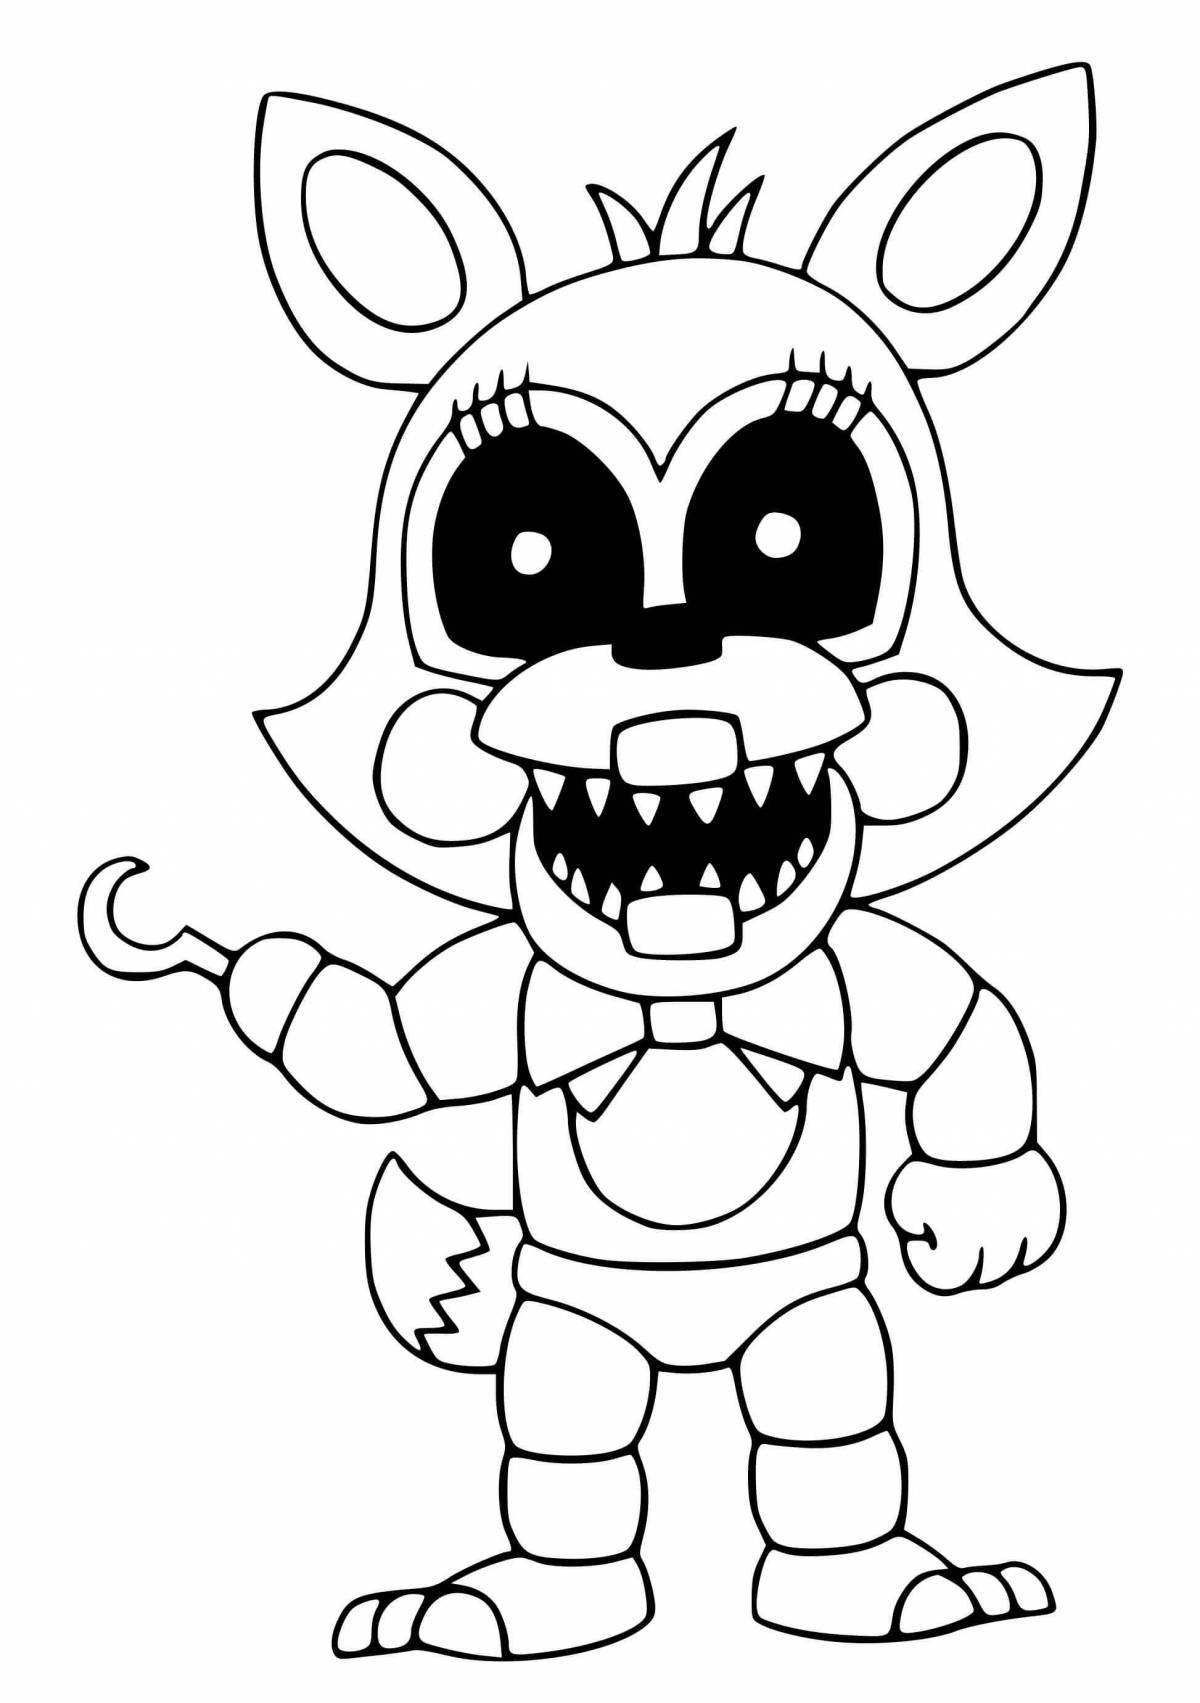 Exciting fnaf 6 coloring